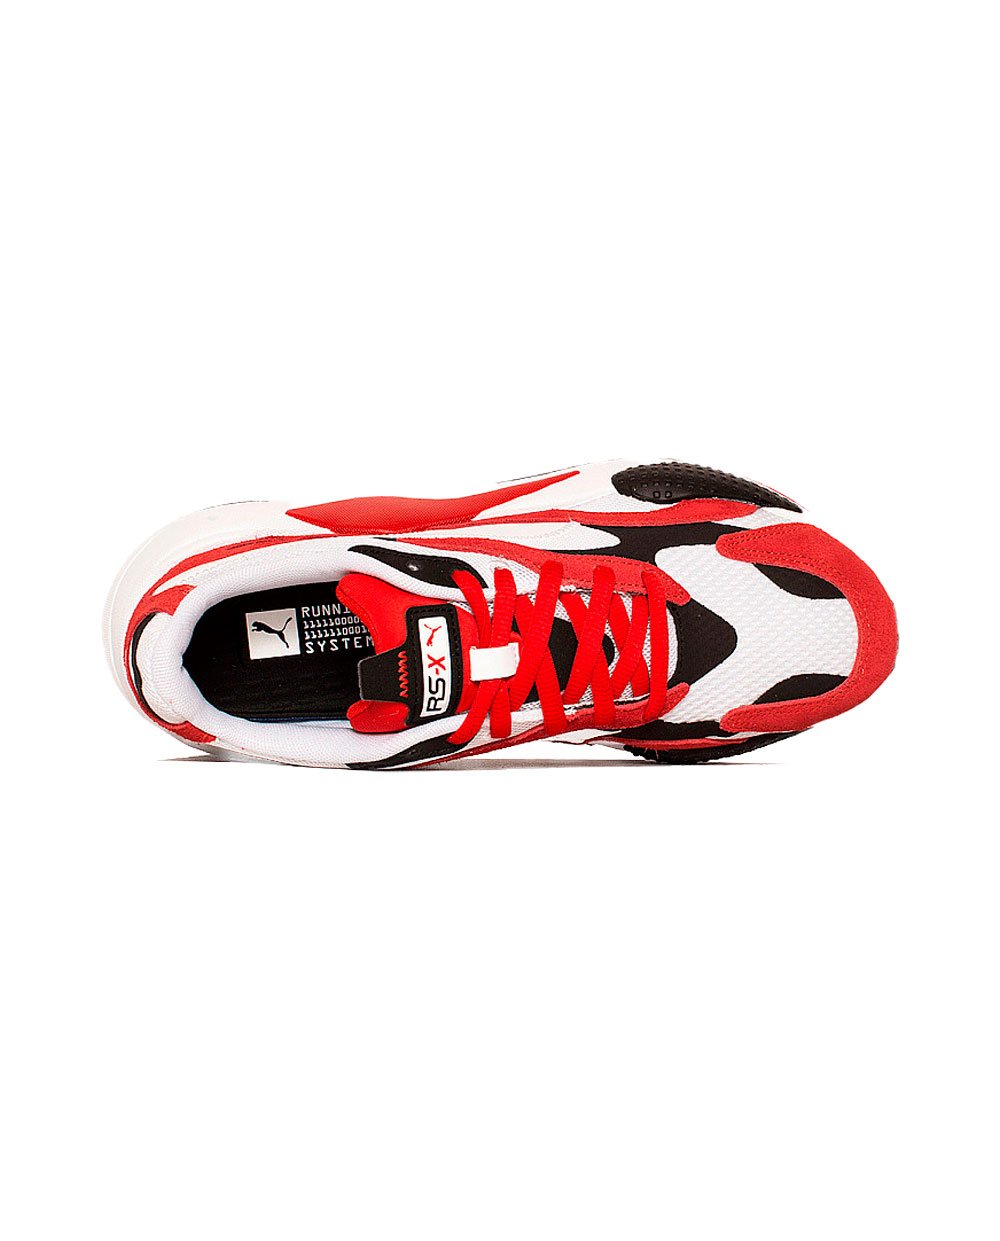 Puma RS X³ Puzzle Red